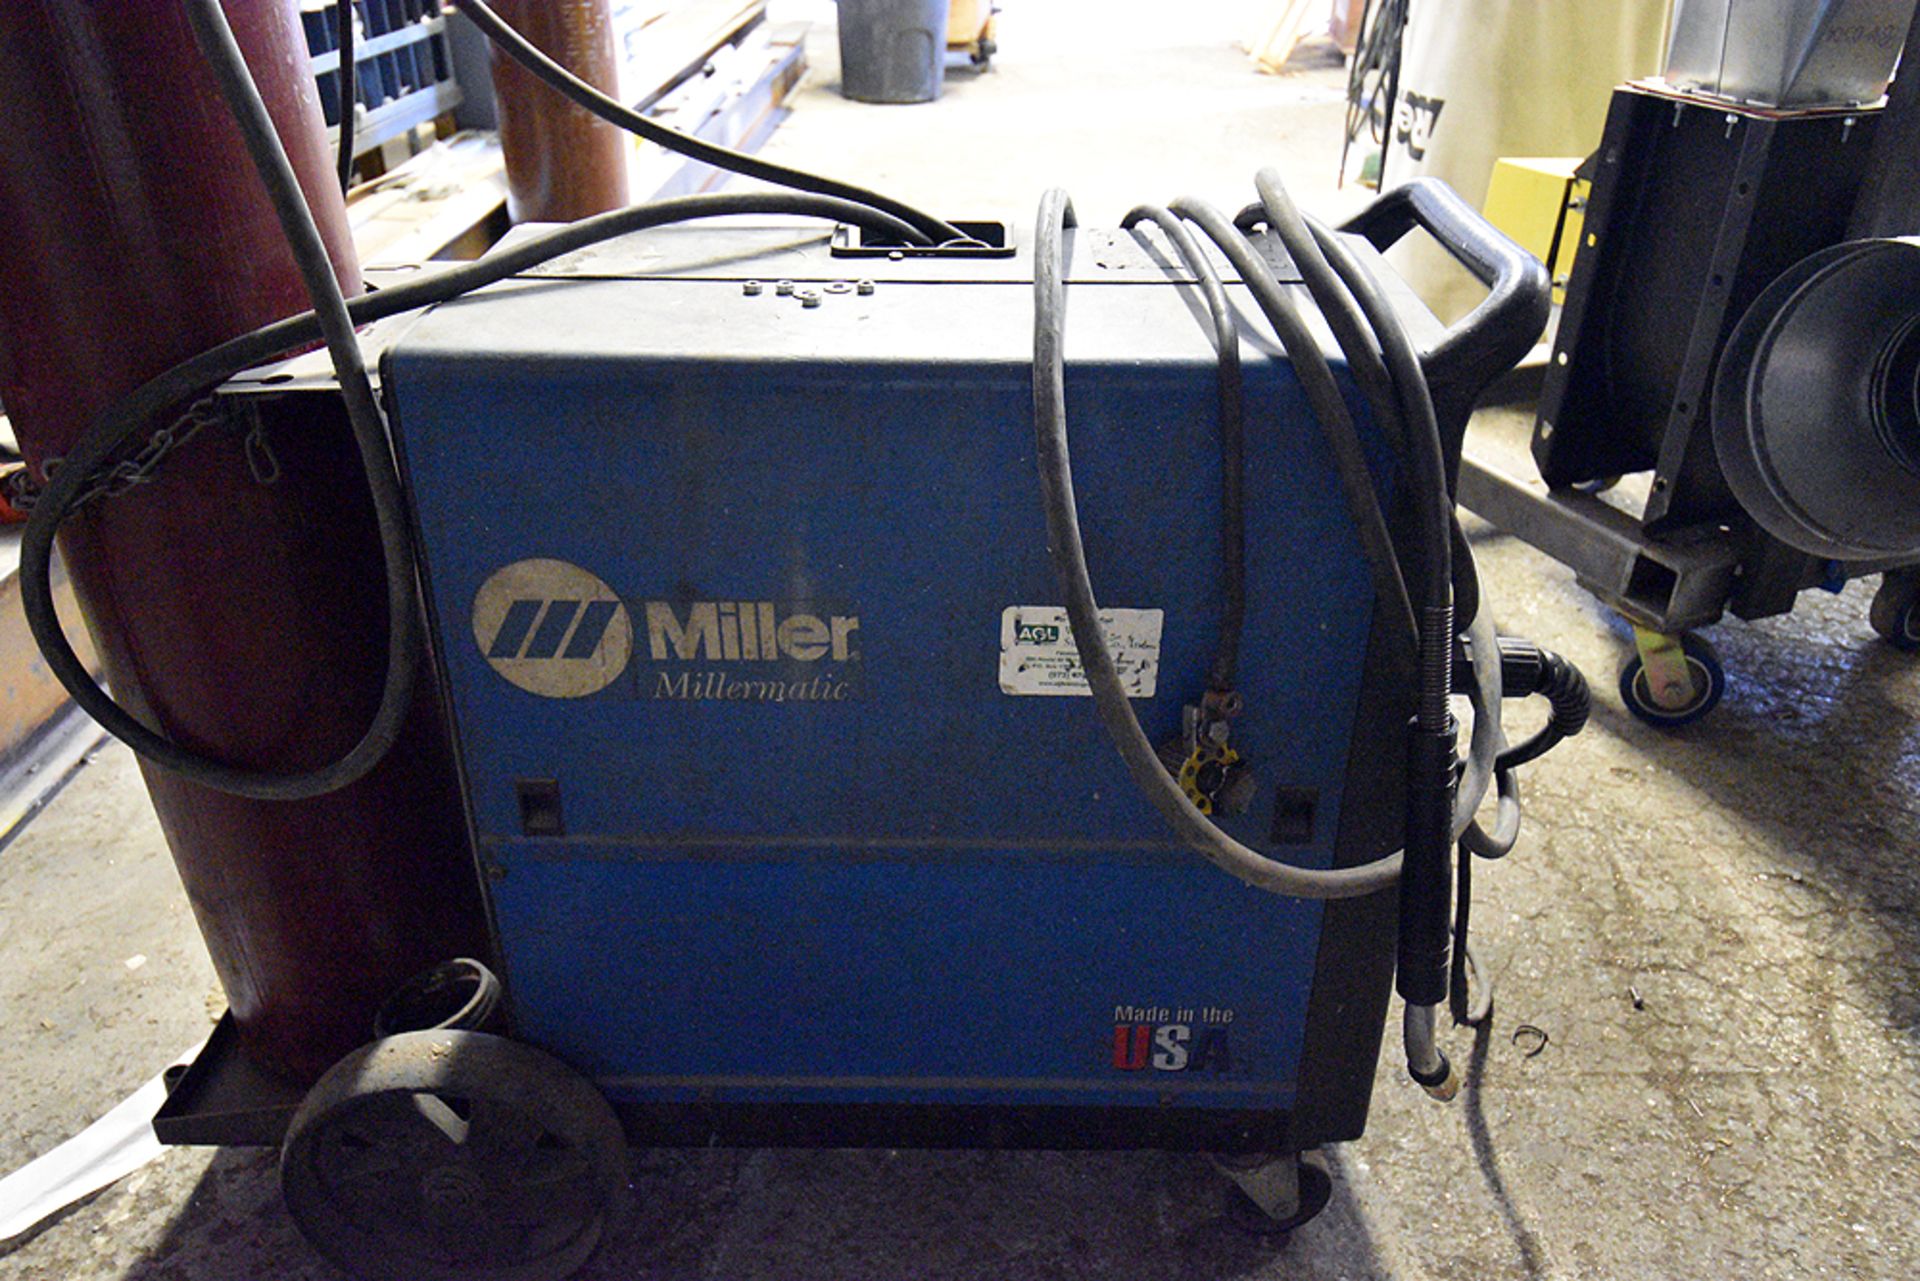 Miller Millermatic 251 MIG Welder on Casters (No Tank Included) - Image 3 of 4